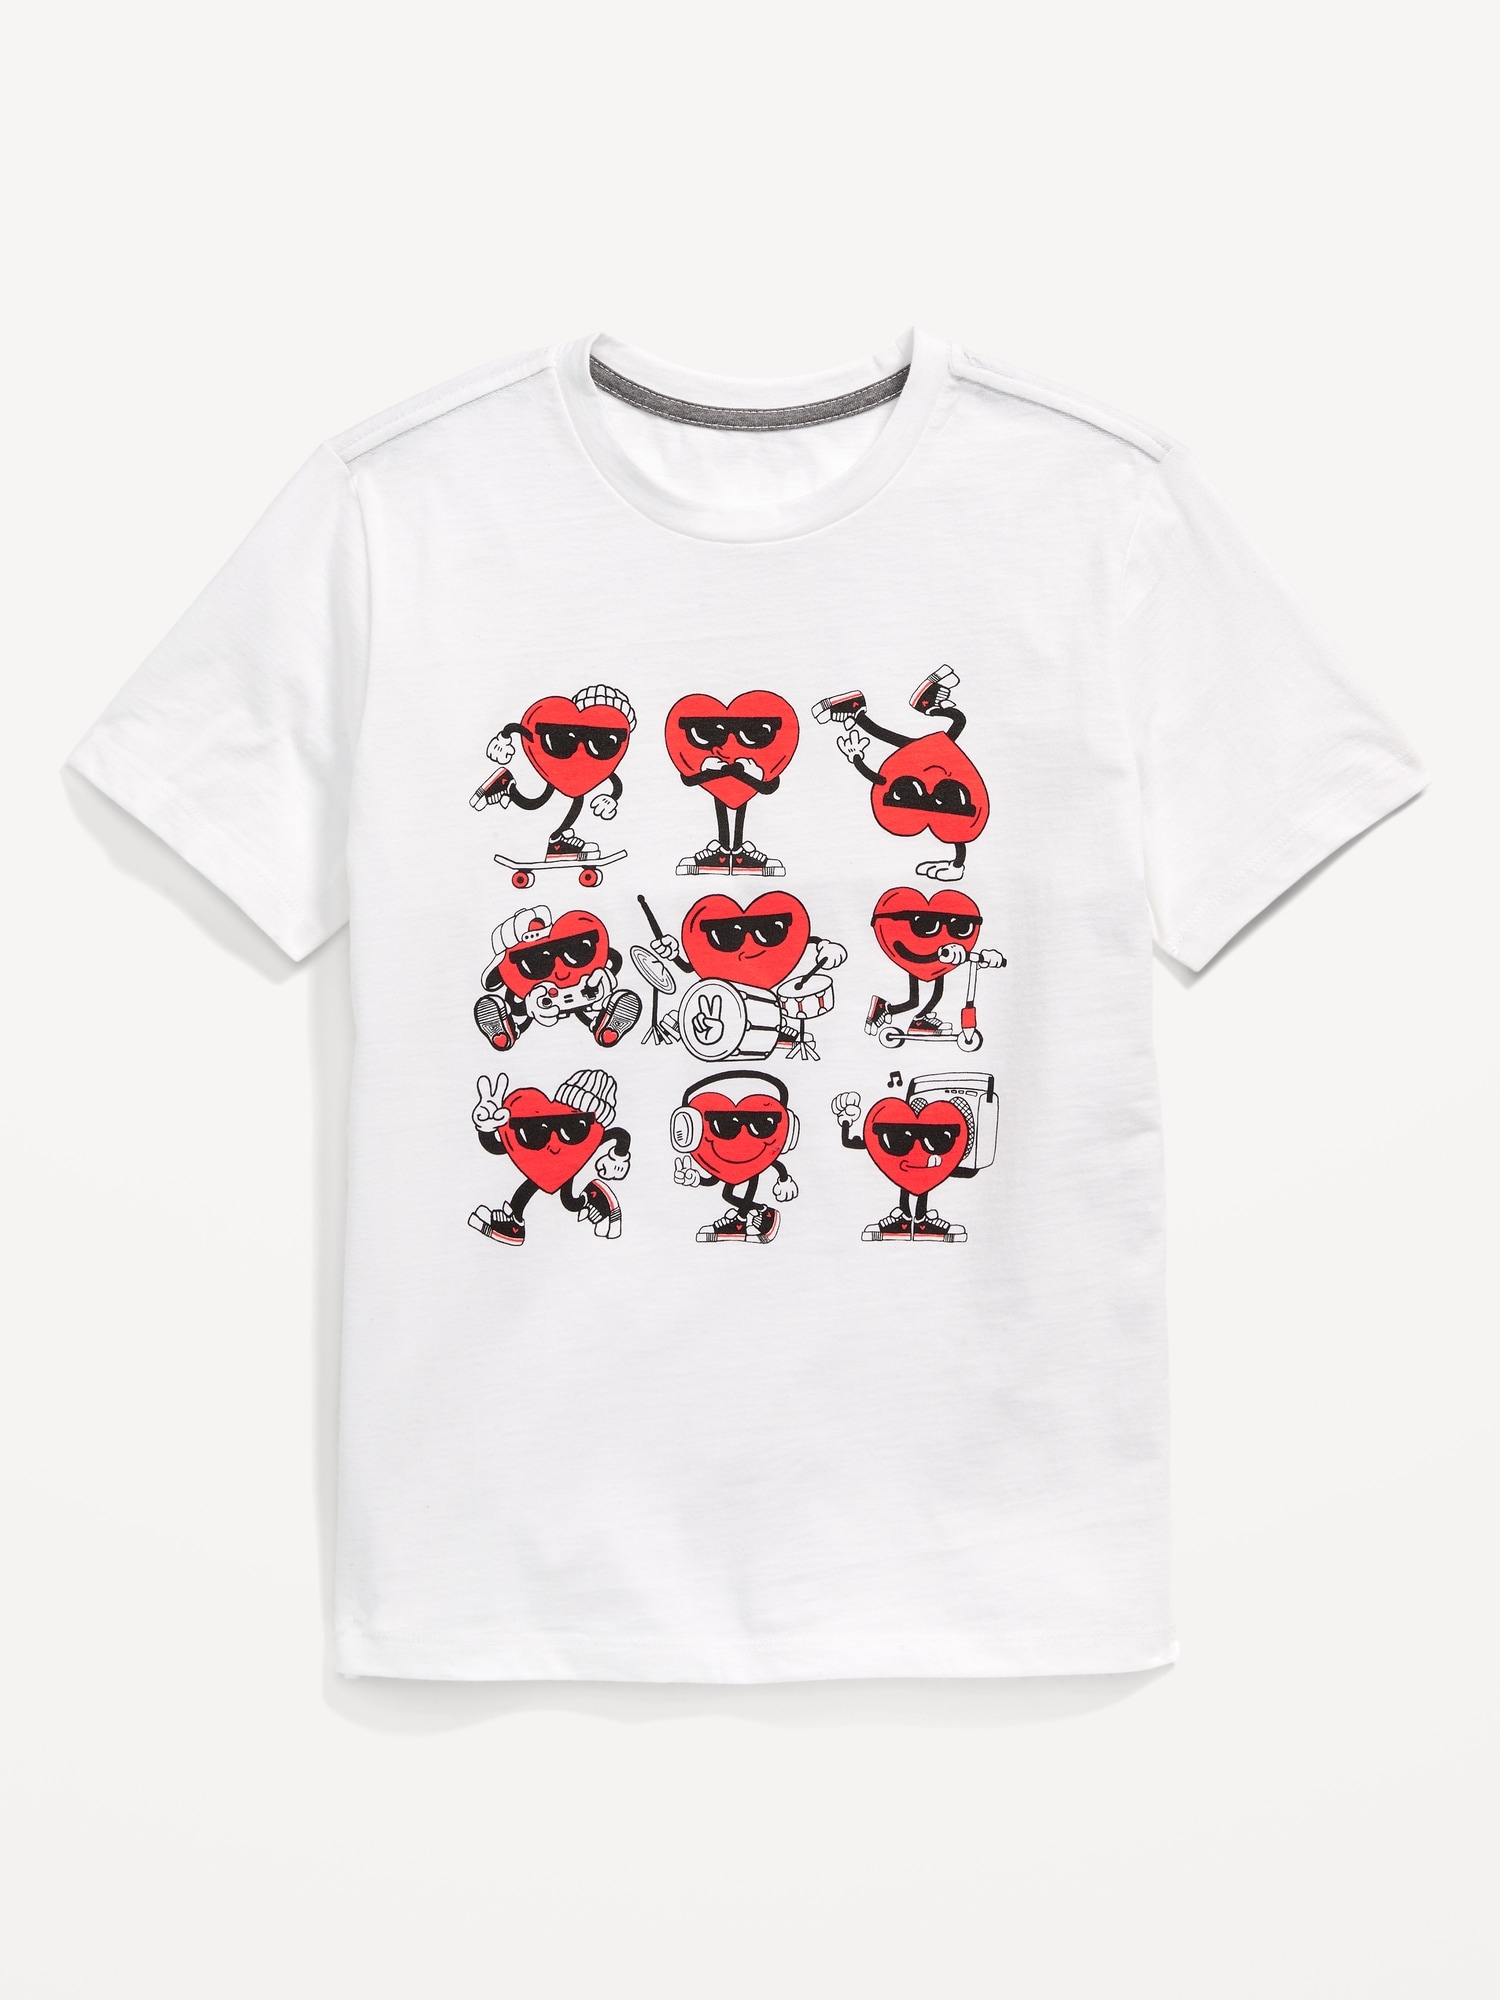 Short-Sleeve Valentine's Day Graphic T-Shirt for Boys | Old Navy